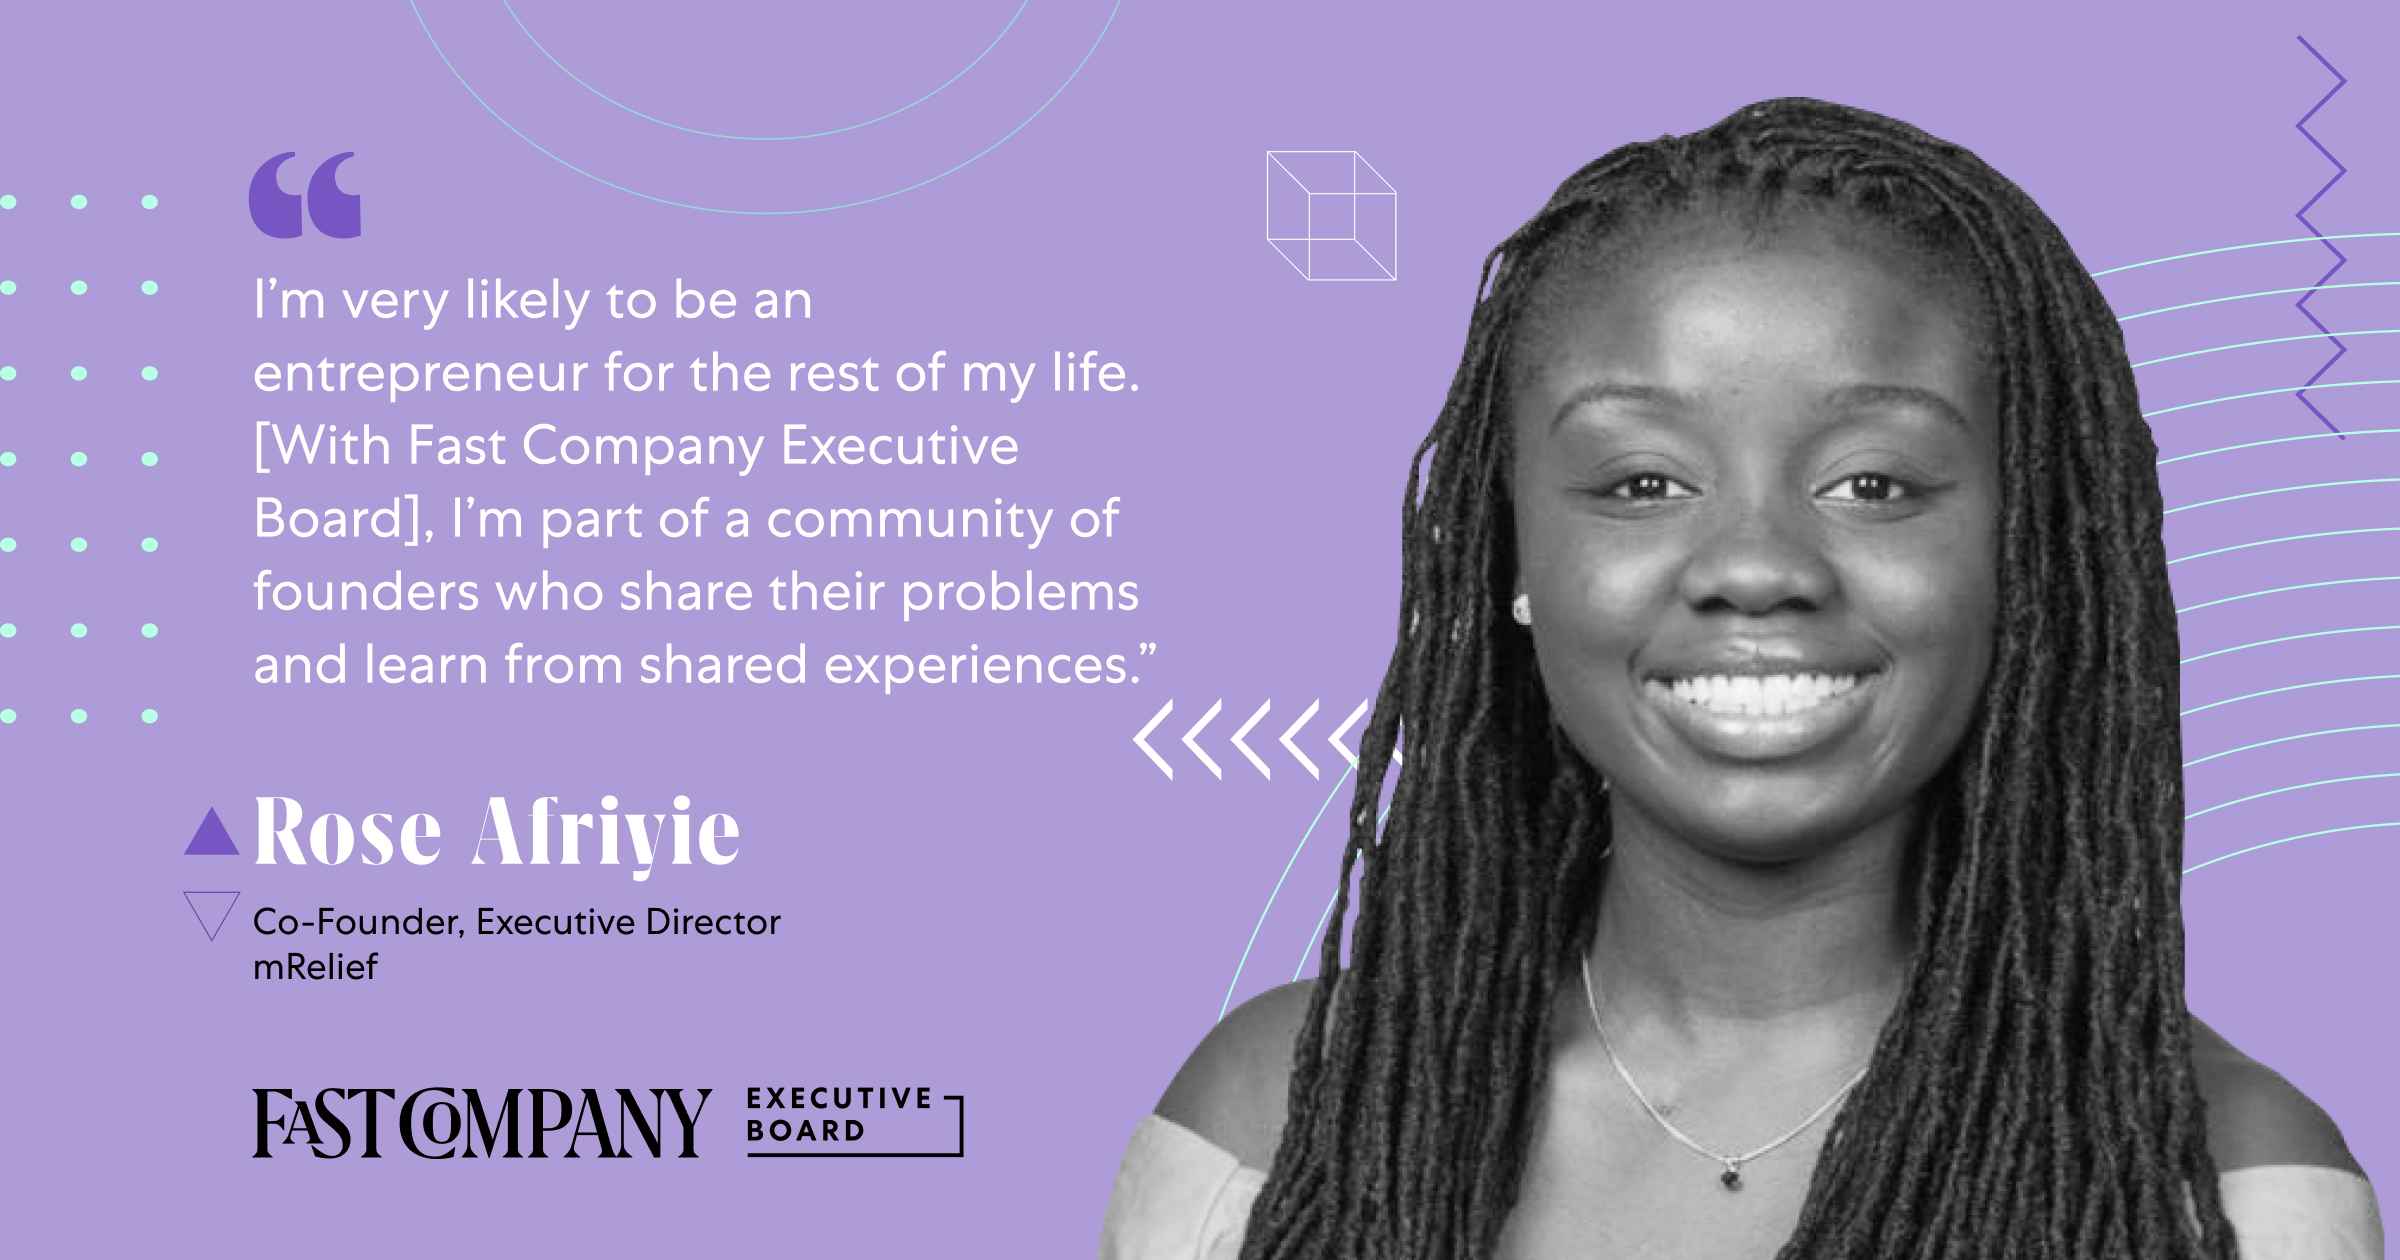 Through Fast Company Executive Board, Rose Afriyie Will Share Insights on Scaling a Diverse Organization